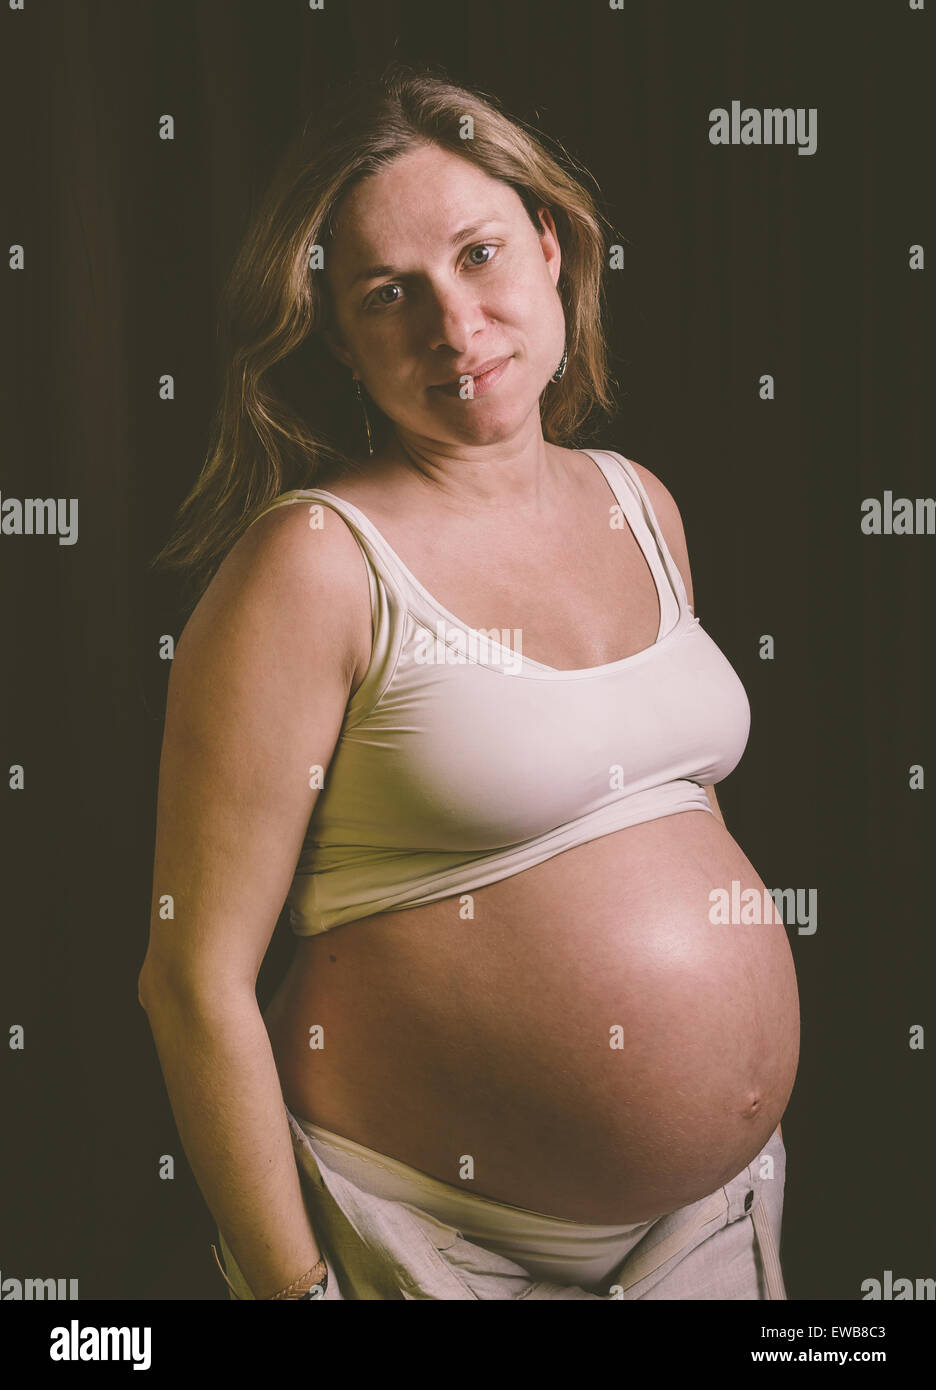 Pregnant woman looking at camera in a studio portrait Stock Photo